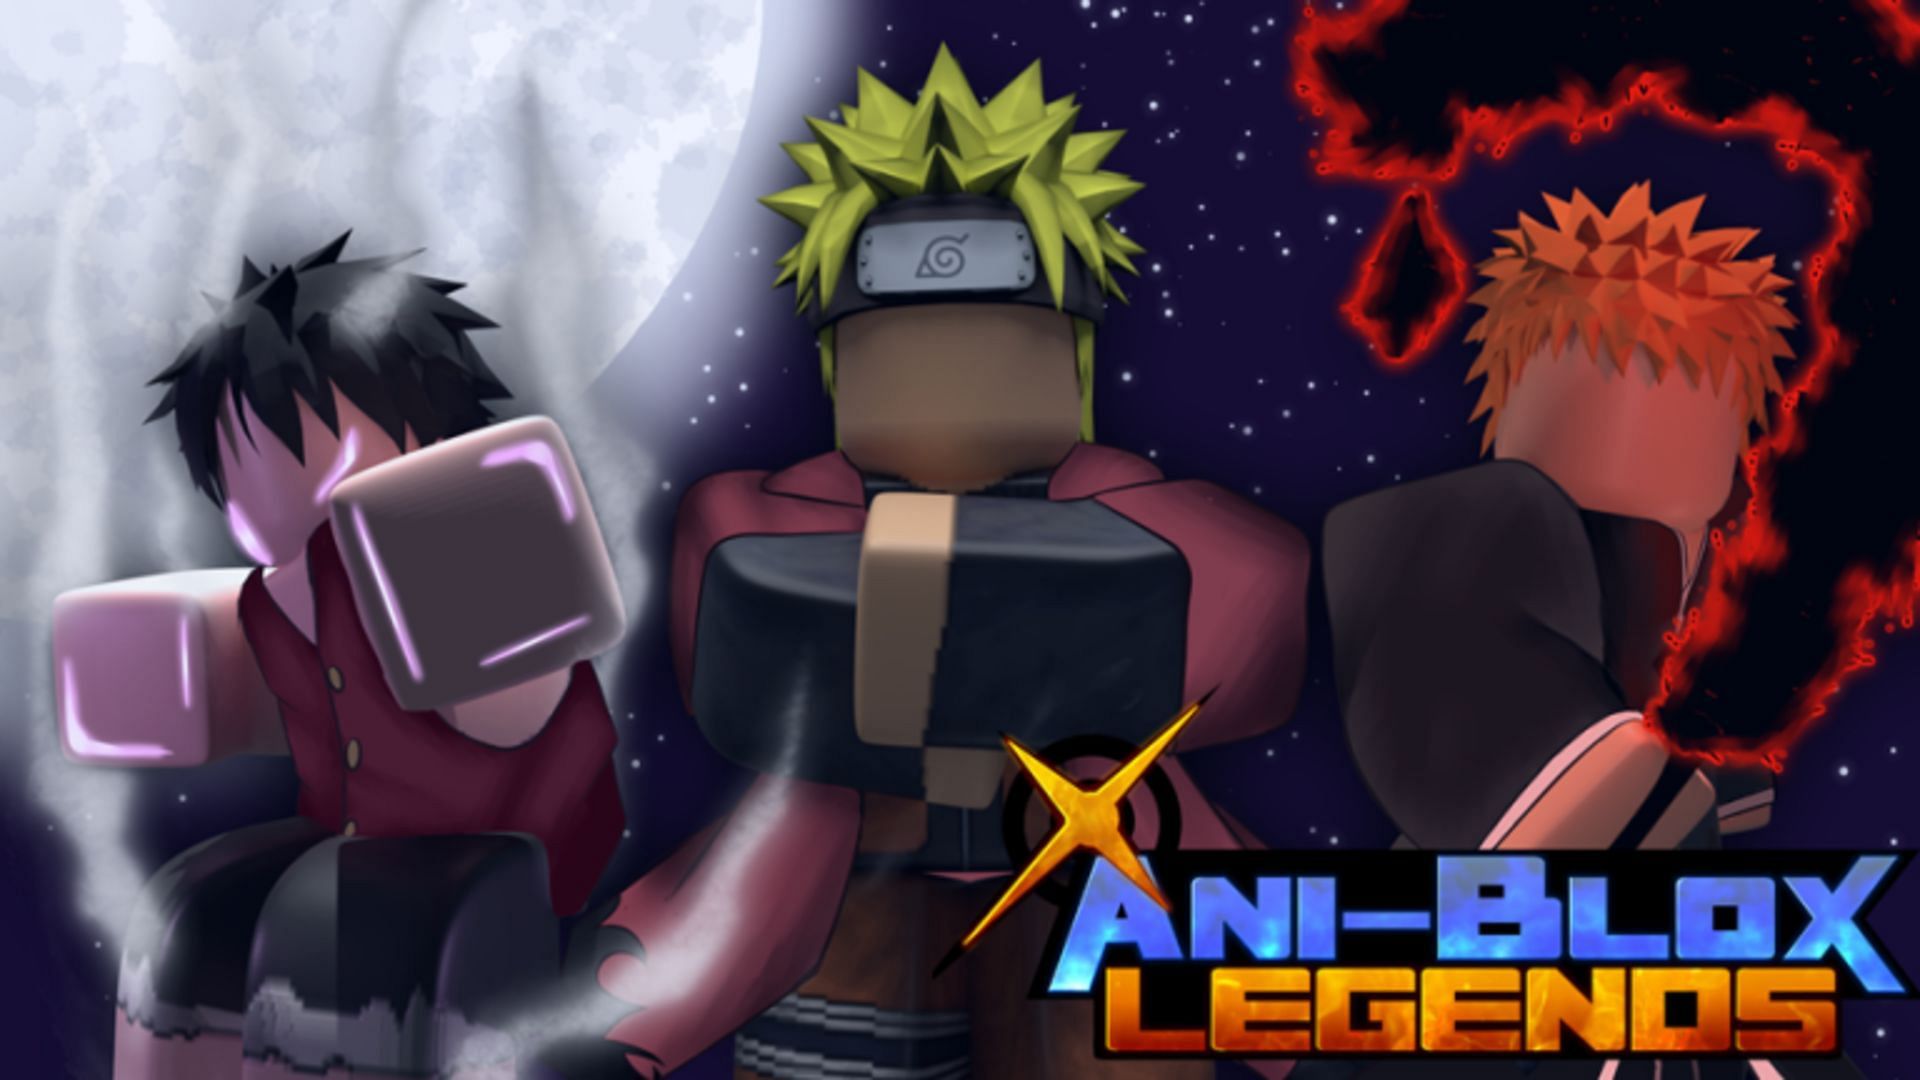 Meet, recruit, and fight alongside anime characters. (Image via Roblox)